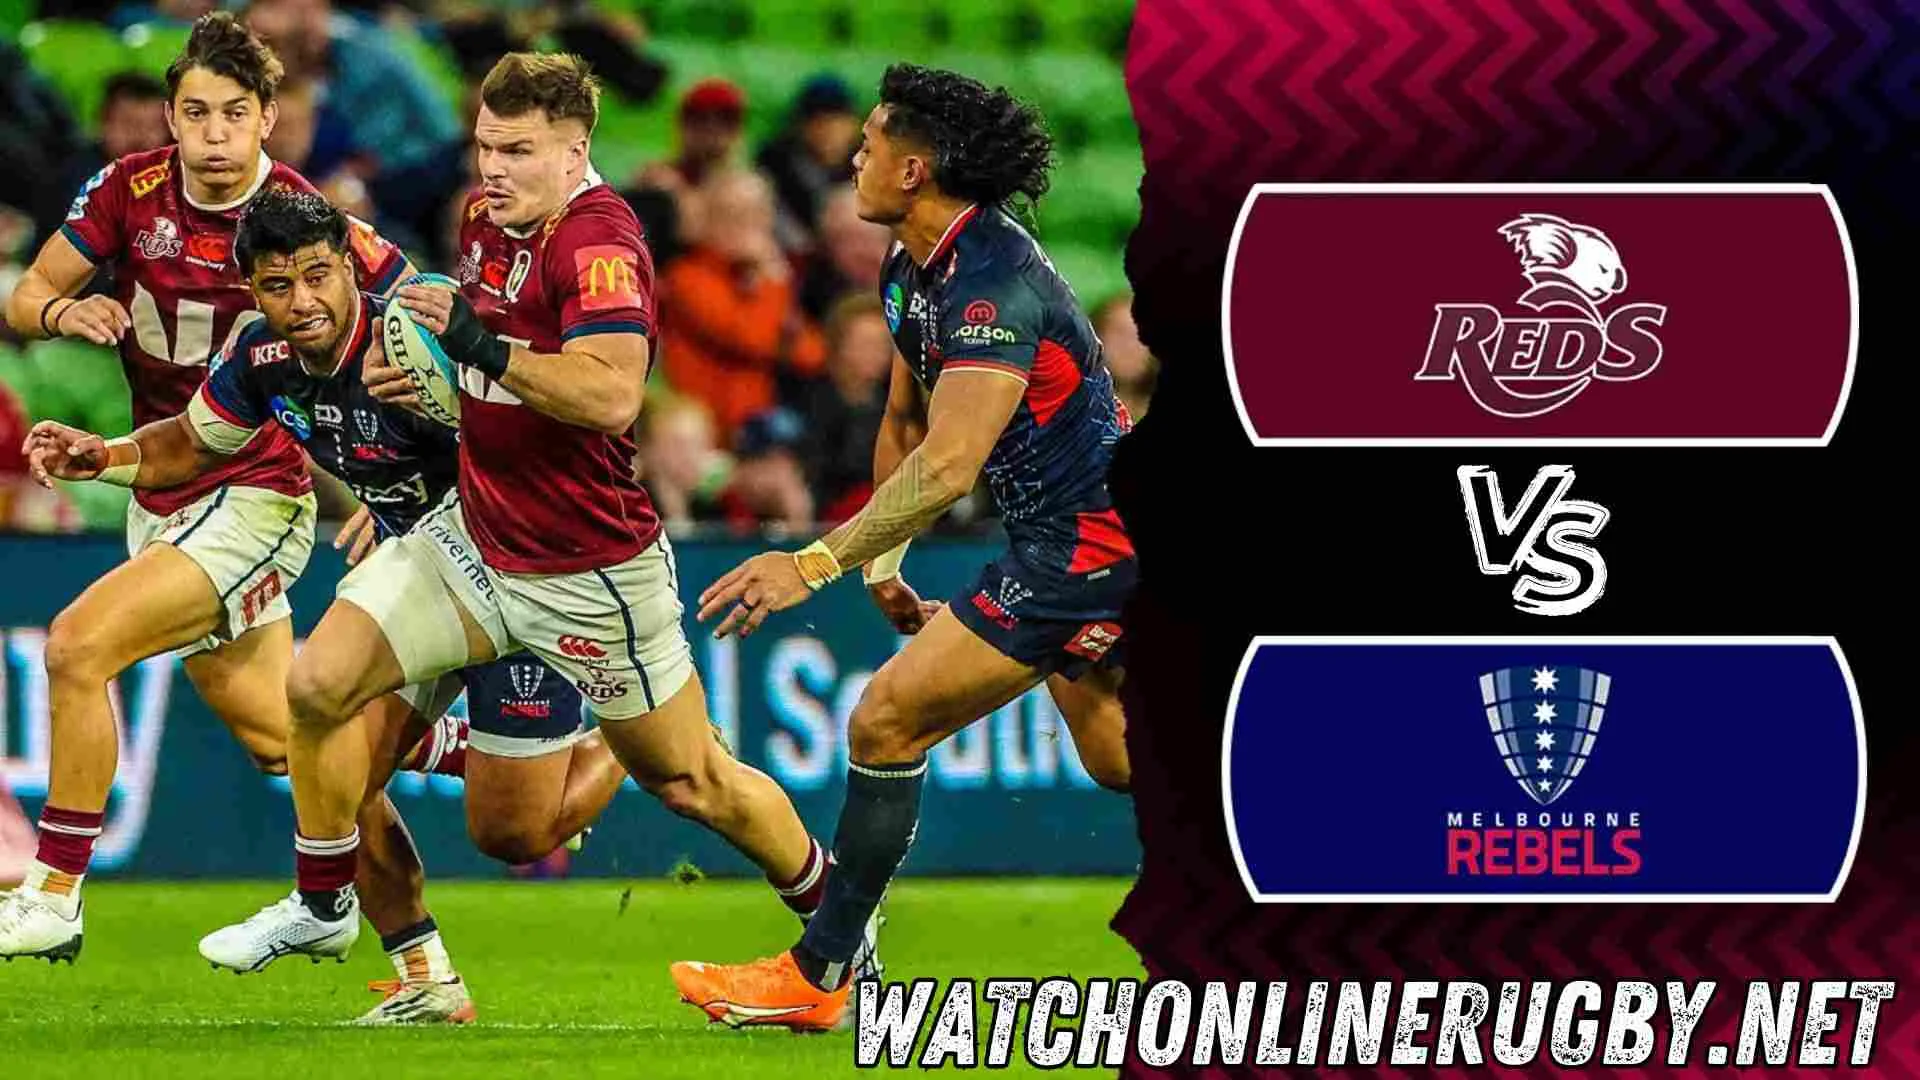 Rebels VS Reds Rugby Live